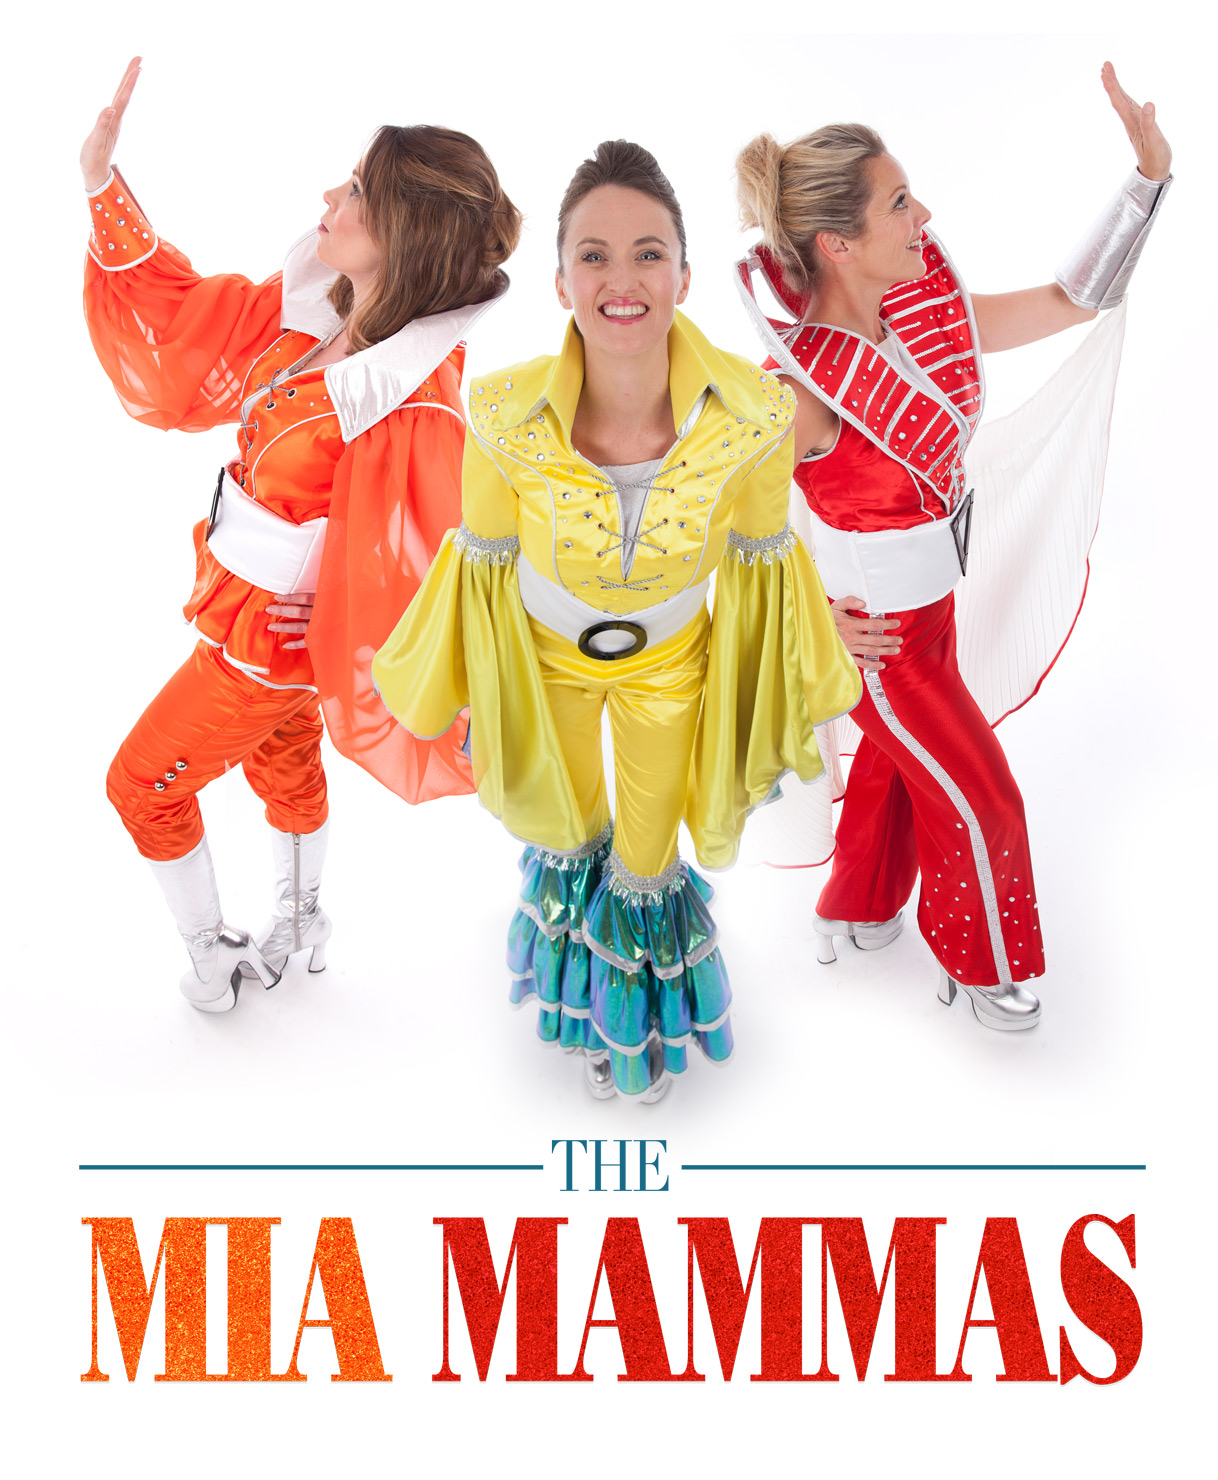 I'm Totally in Love with this Stunning Mamma Mia Party!